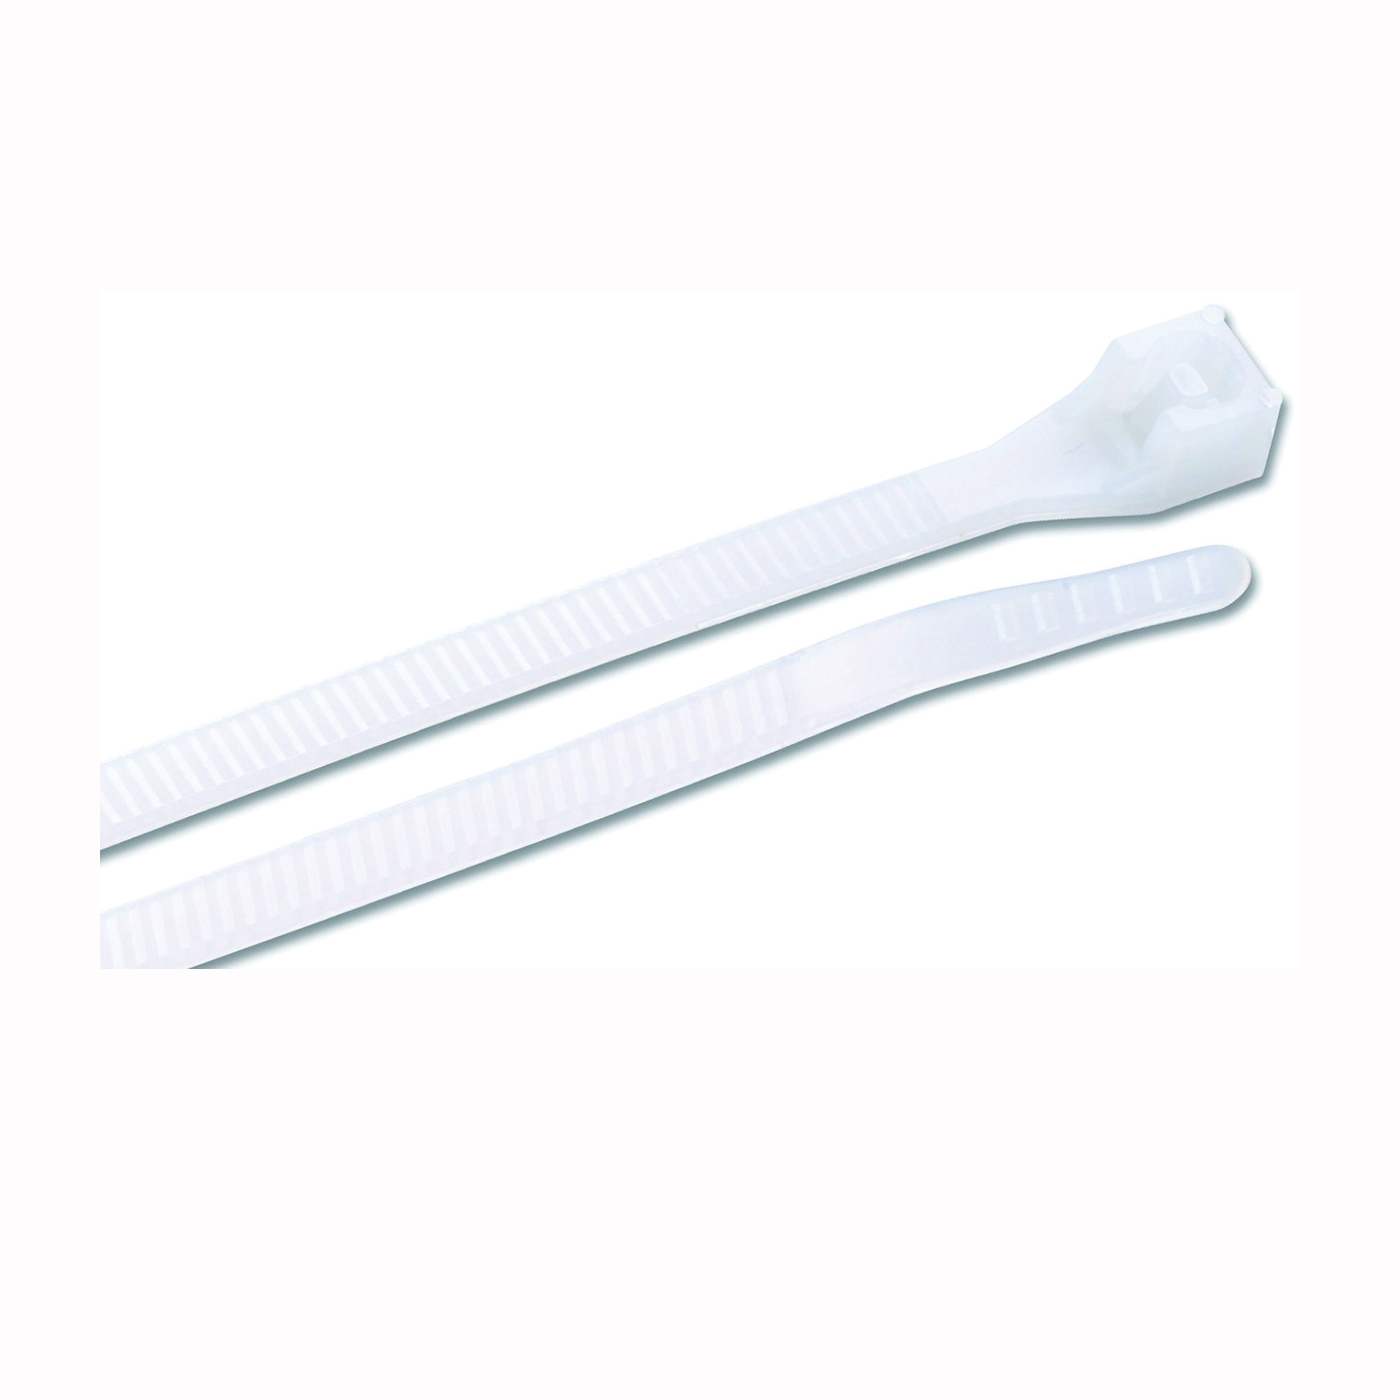 GB 46-507N 8 in. Cable Tie, Double-Lock Locking, 6/6 Nylon, Natural, 500 pk